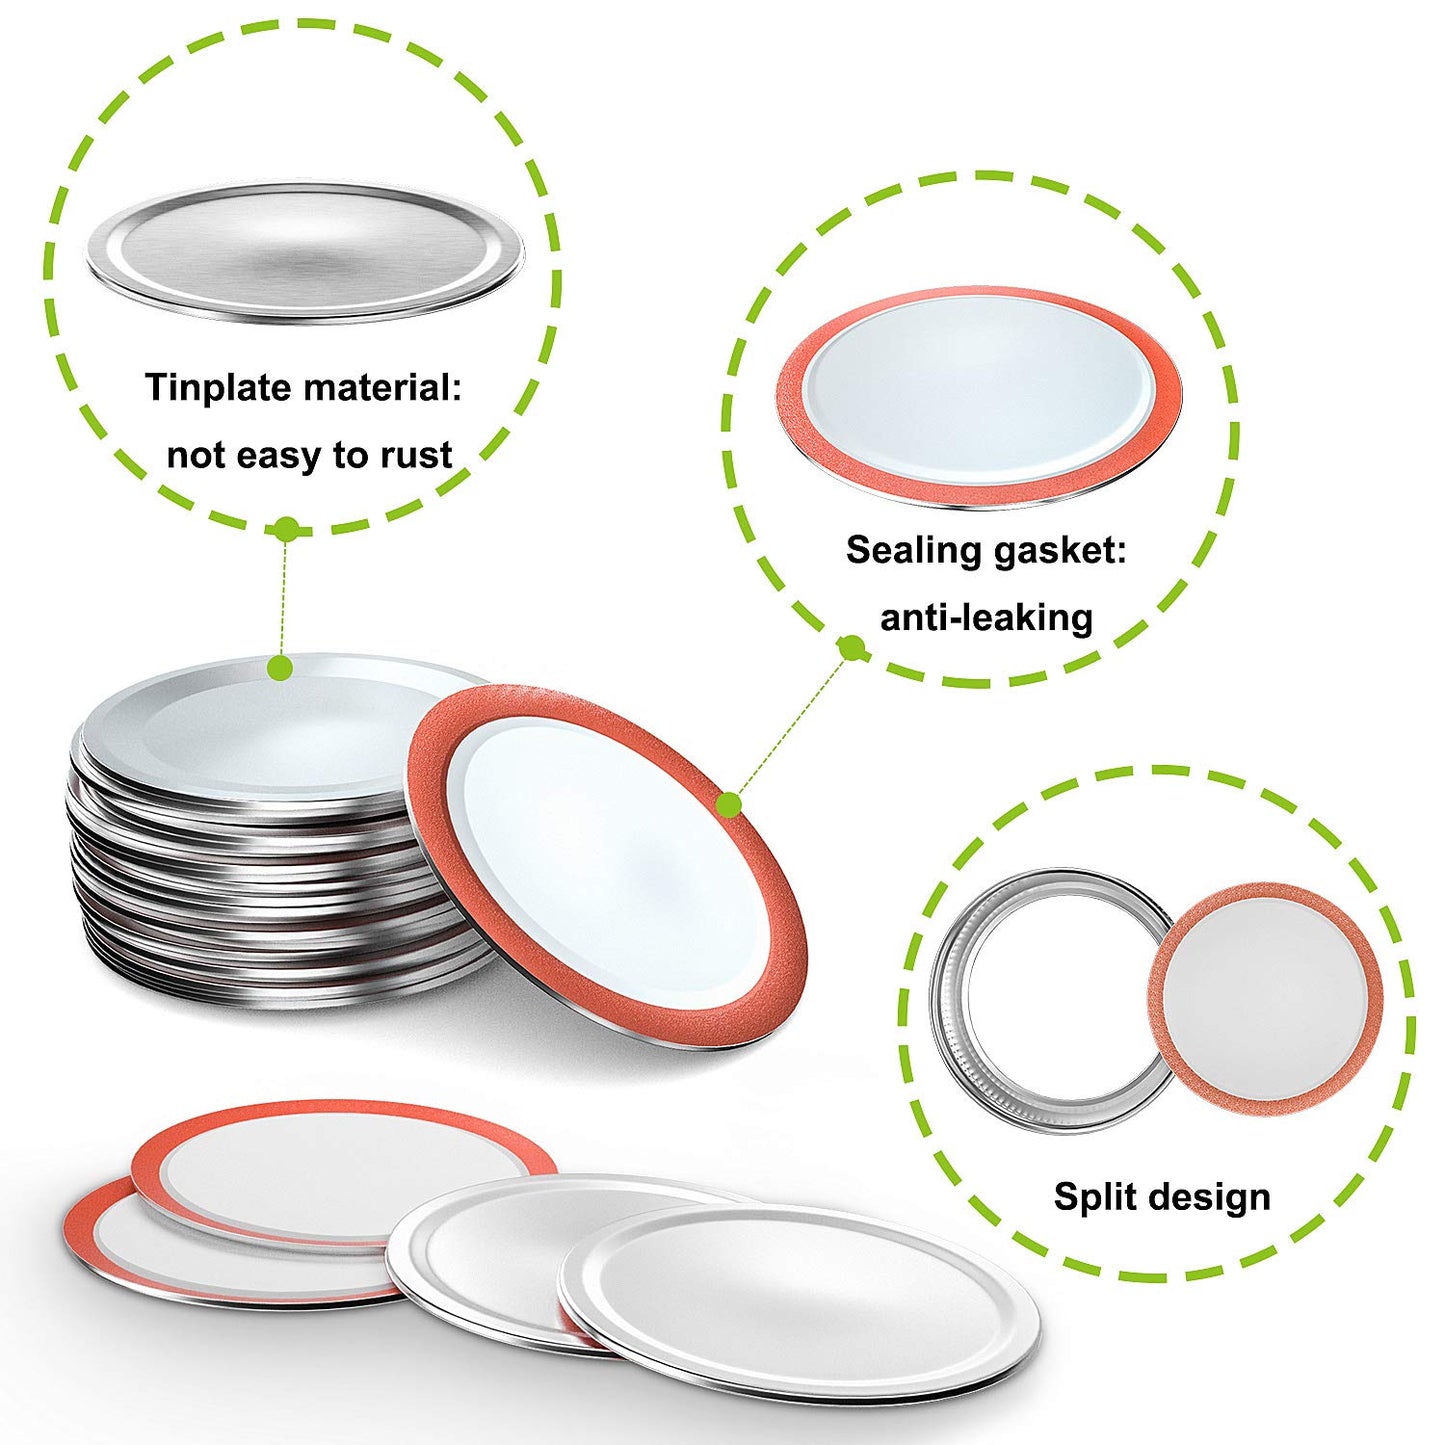 Mason Jar Lids Regular Mouth Canning Lids for Ball, Kerr Jars - 24-Count Split-Type with Leak proof & Airtight Seal Features, Metal Mason Jar Lids for Canning - Food Grade Material, Silver/70 MM